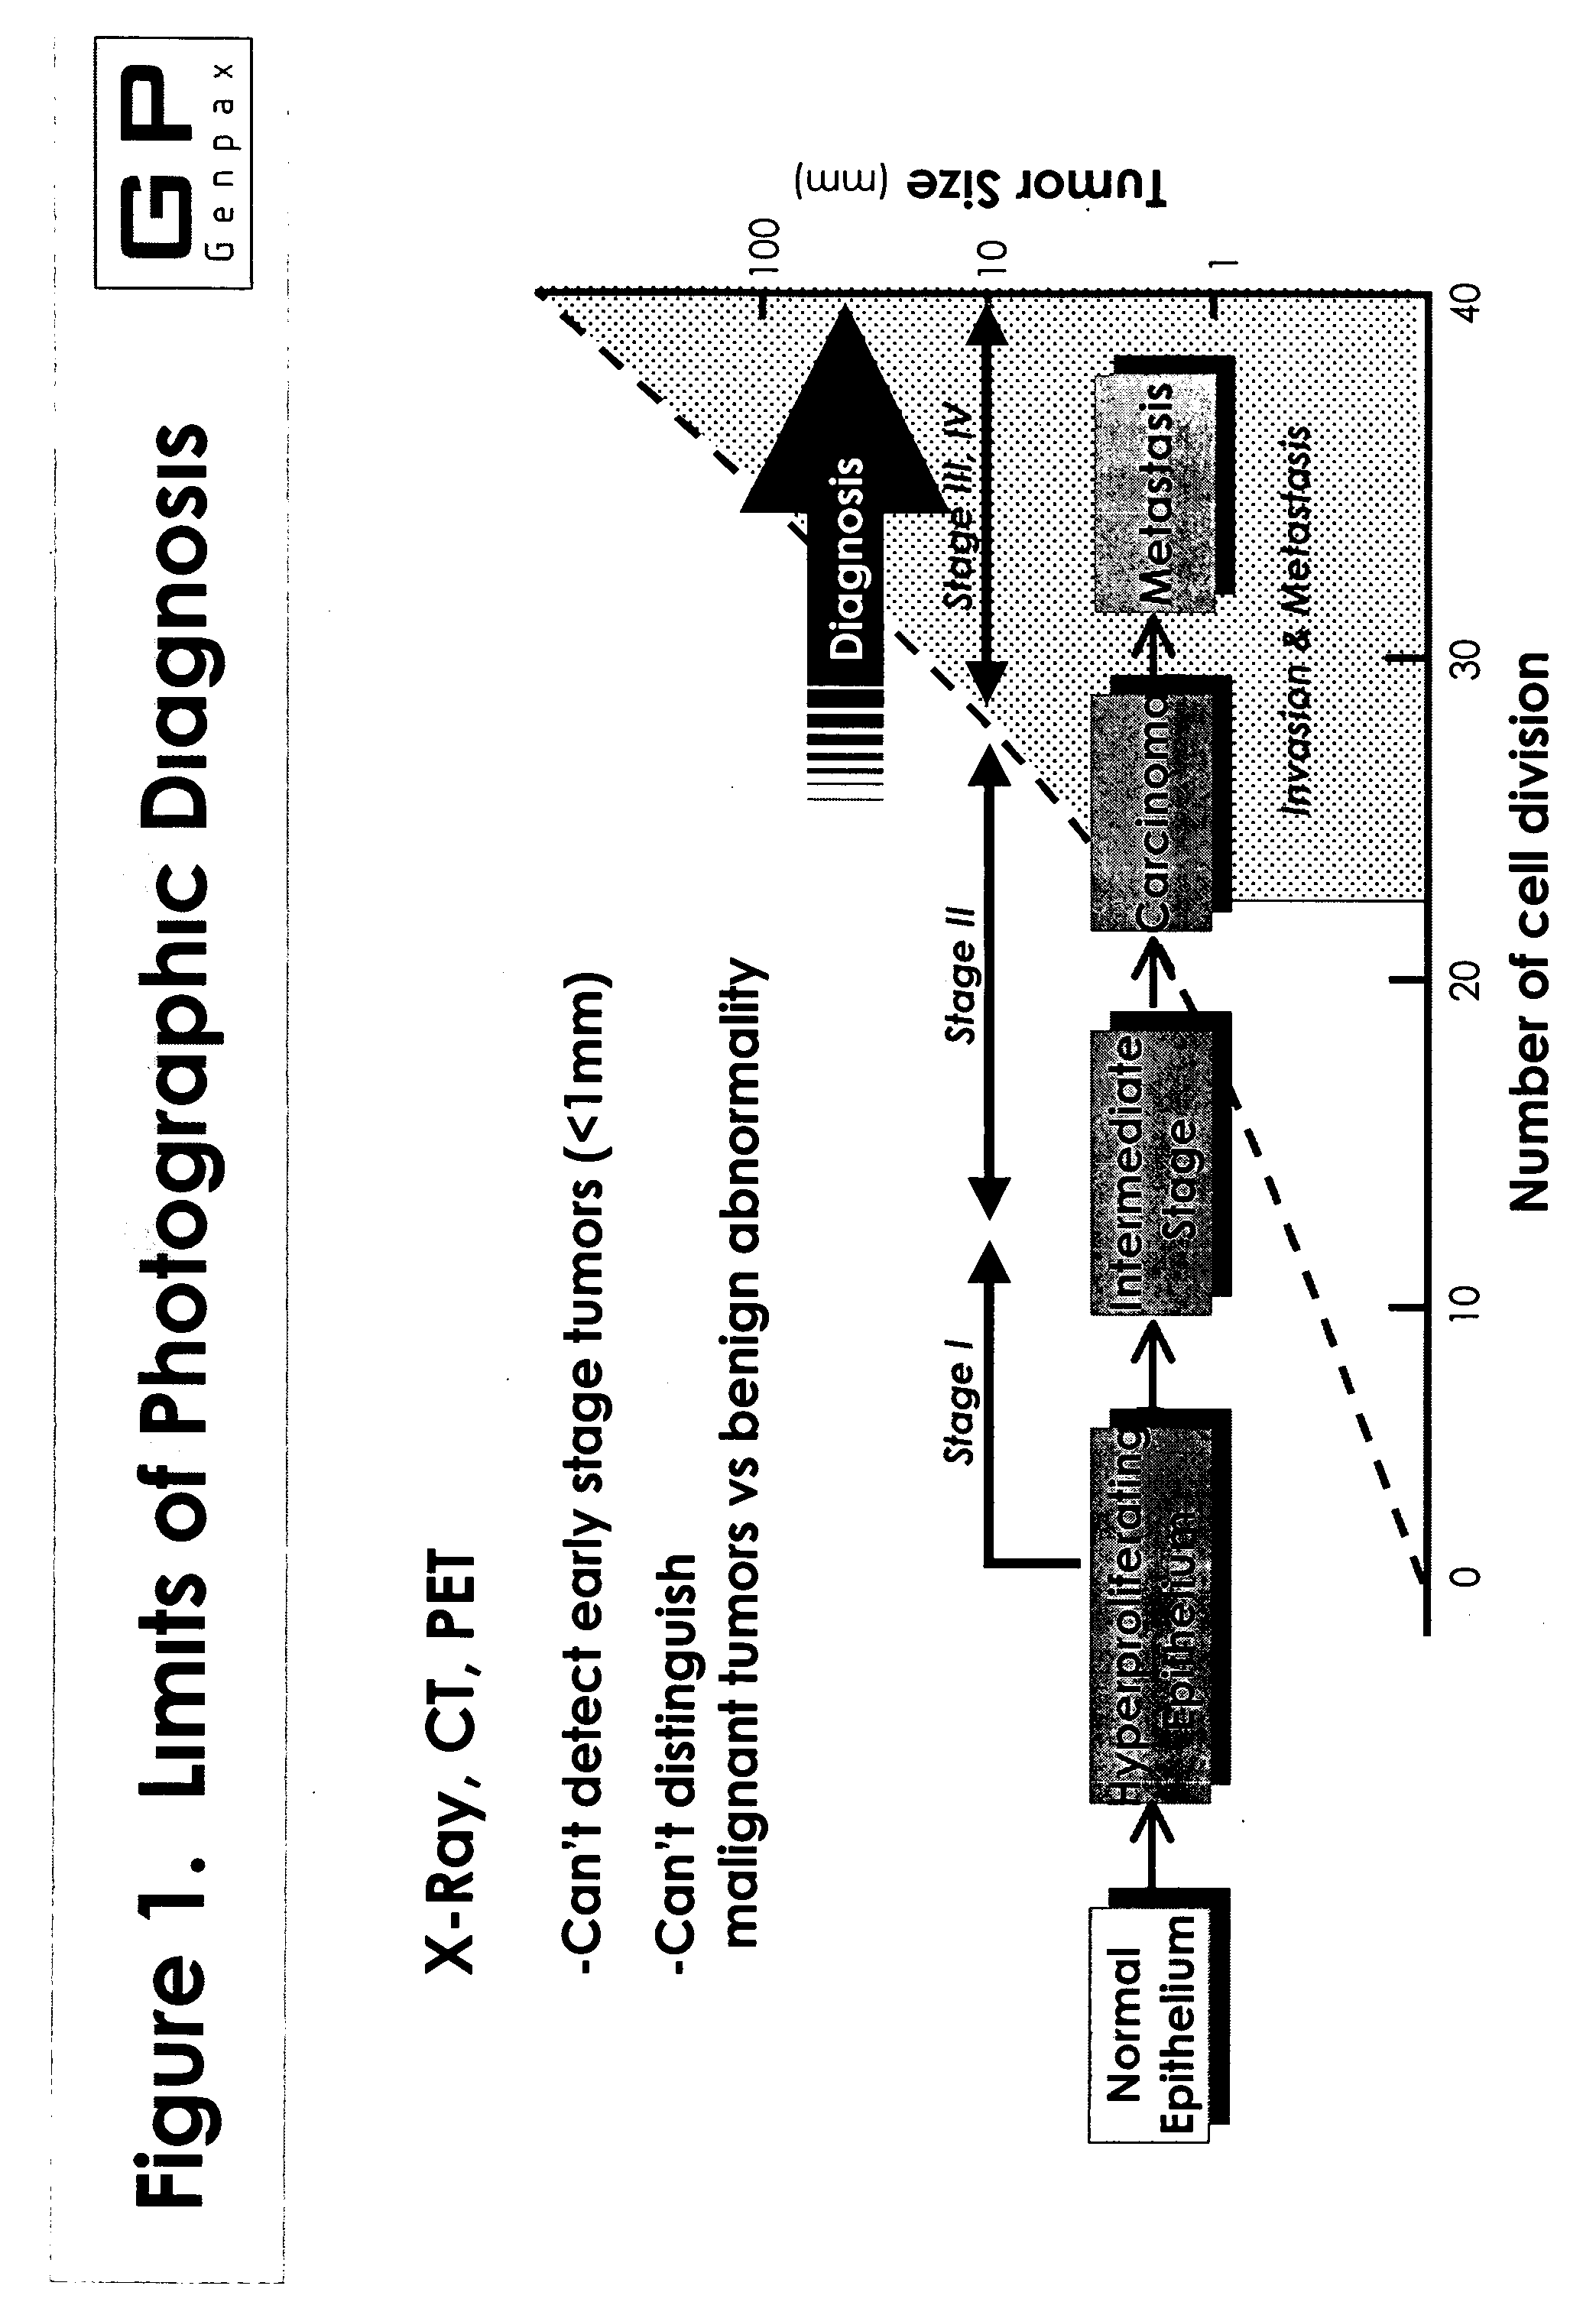 Novel composition and methods for the diagnosis of lung cancer